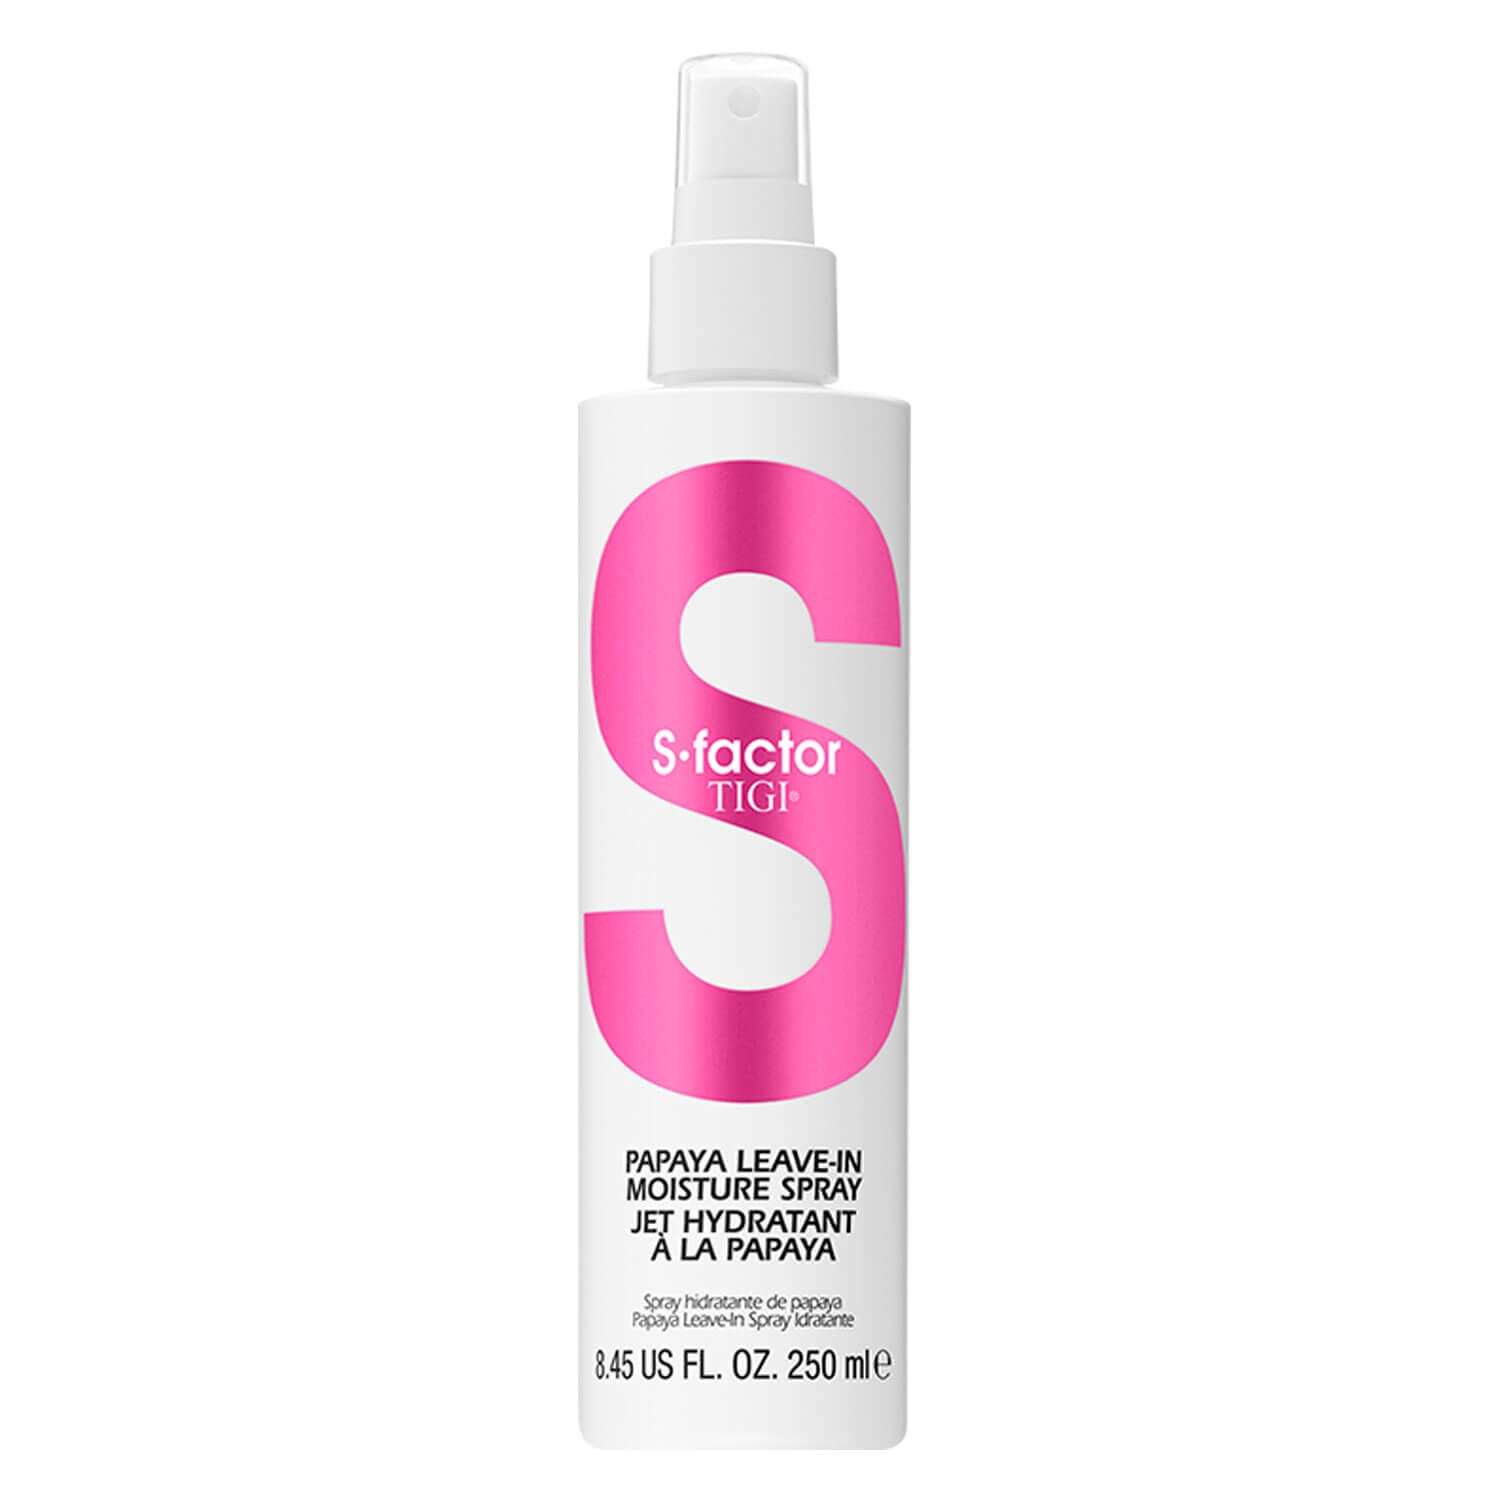 Product image from S Factor - Papaya Leave-In Moisture Spray